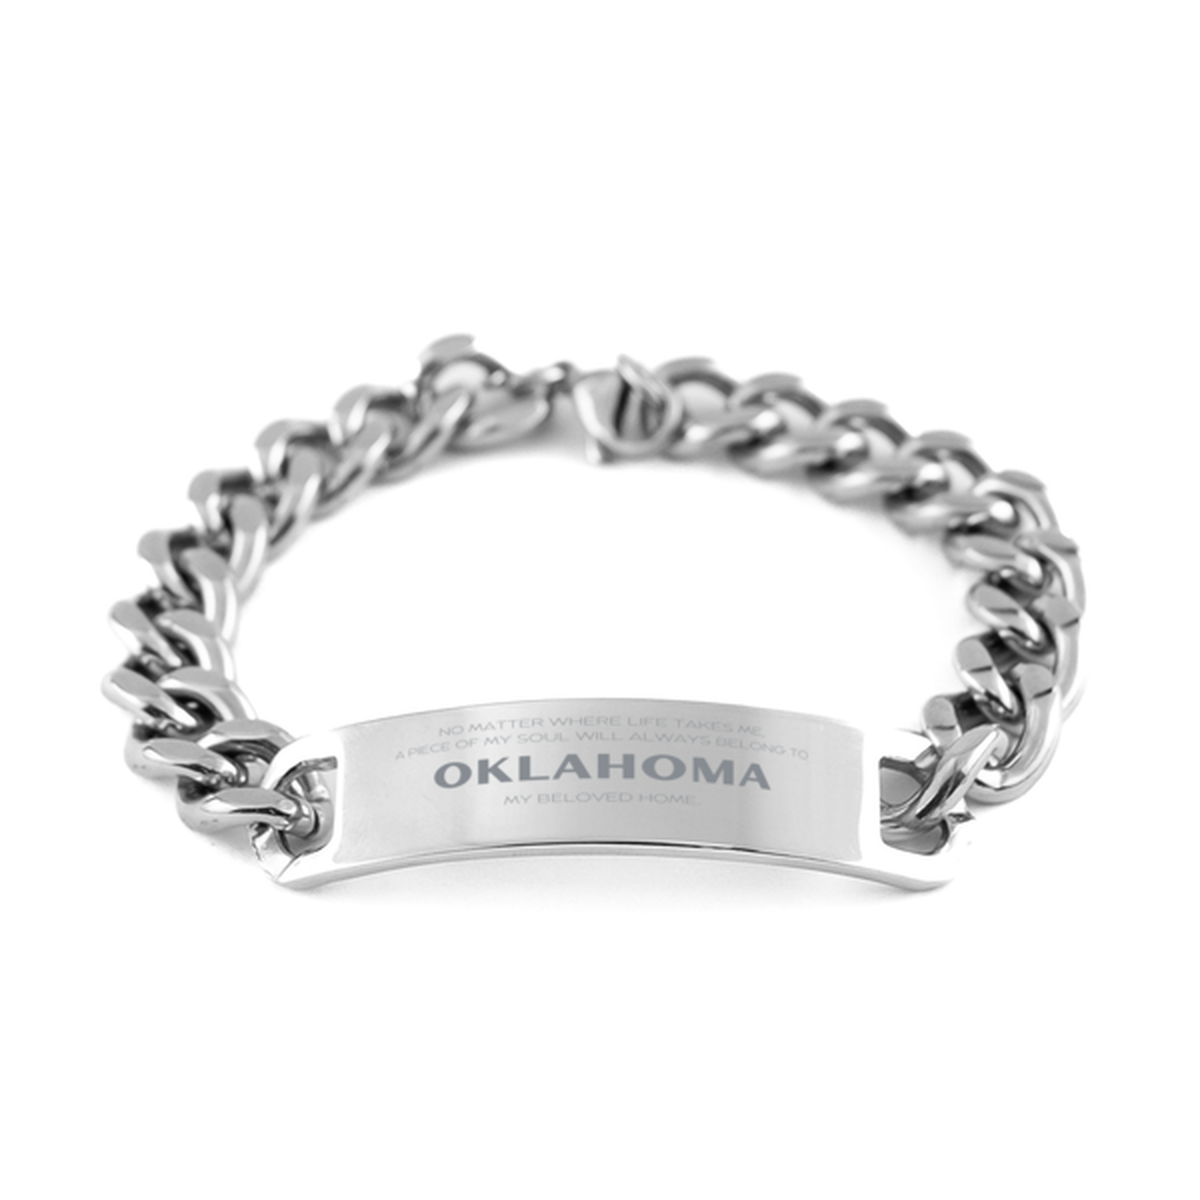 Love Oklahoma State Gifts, My soul will always belong to Oklahoma, Proud Cuban Chain Stainless Steel Bracelet, Birthday Unique Gifts For Oklahoma Men, Women, Friends